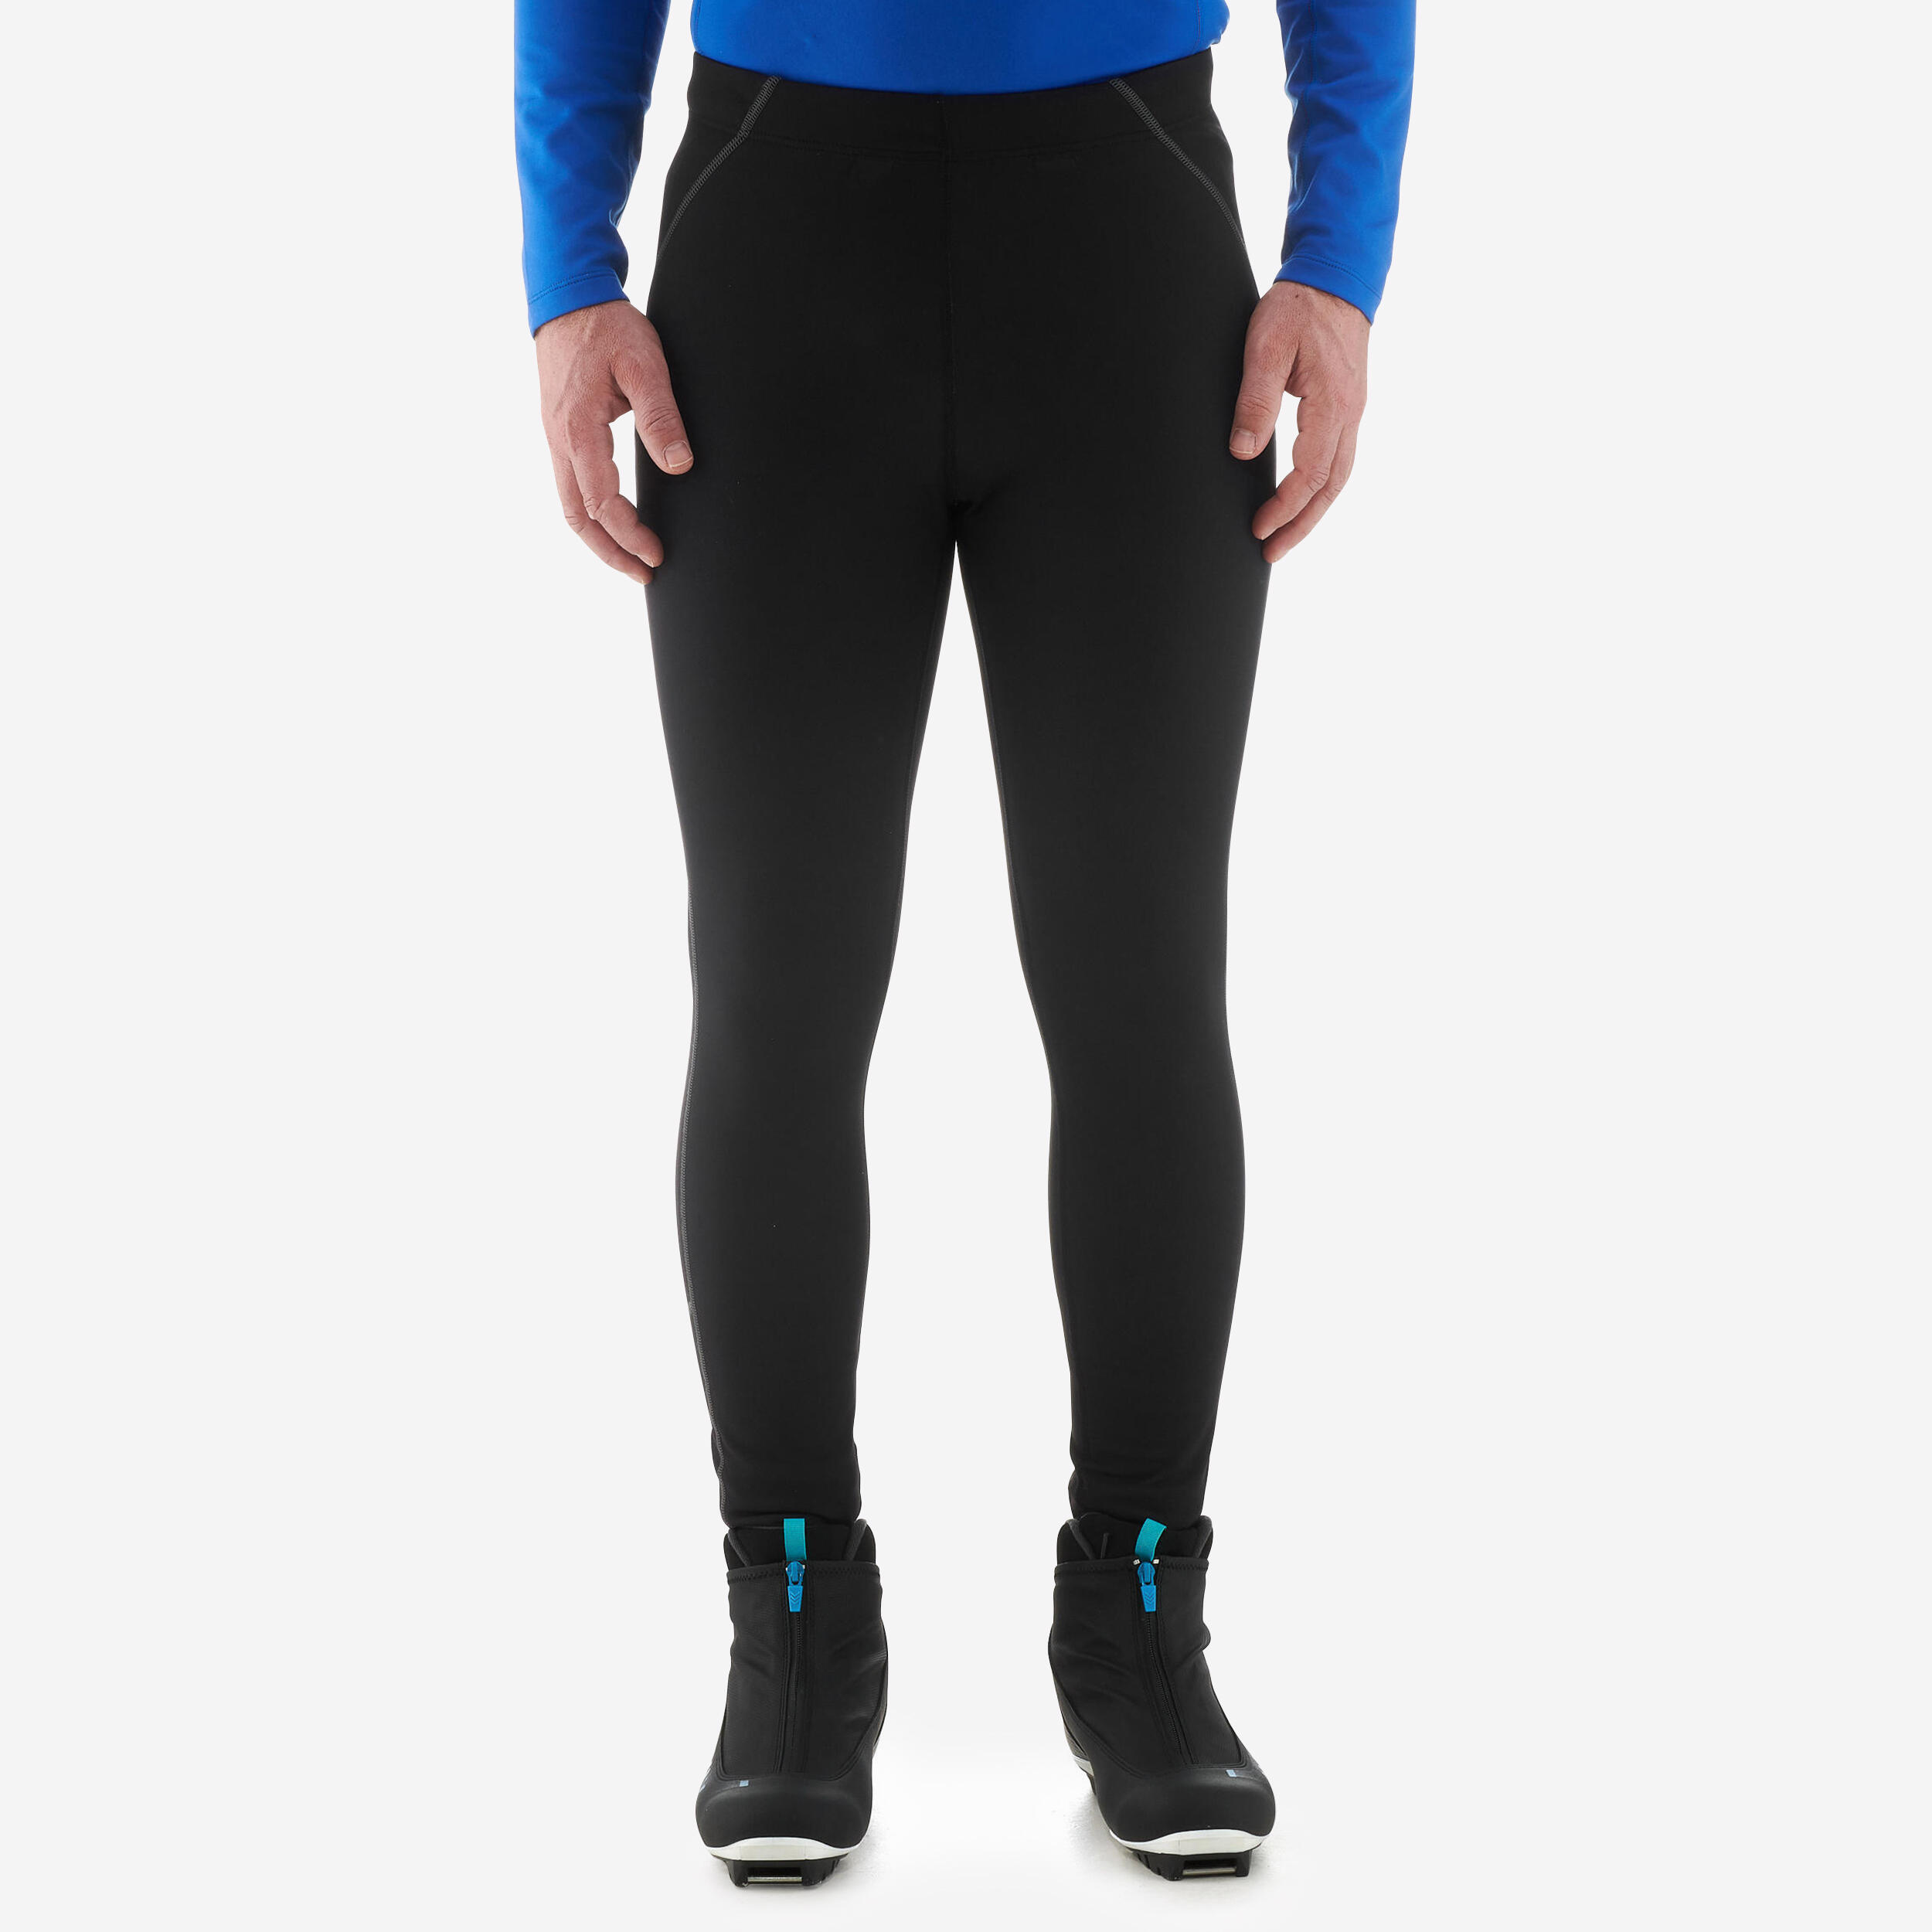 Men's Cross-Country Tights